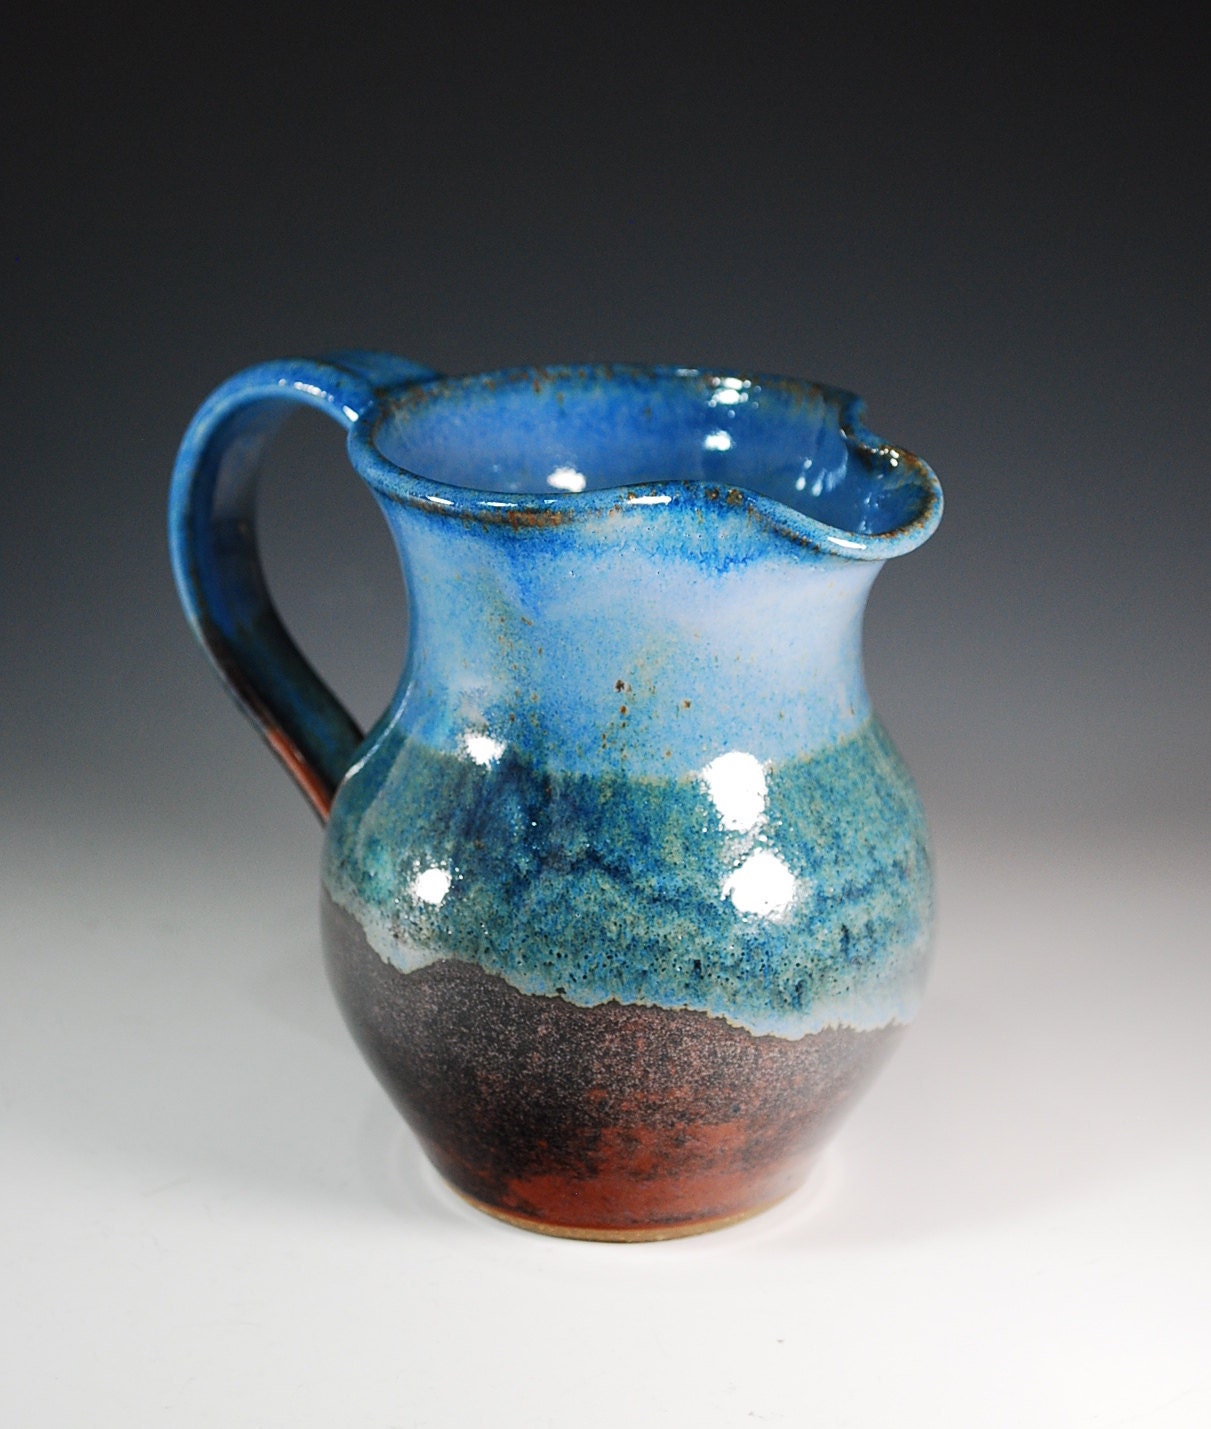 Pitcher - Blue and Black / Brown - Holds 16 oz - Wheel Thrown Stoneware Clay - CarolBroadleyPottery